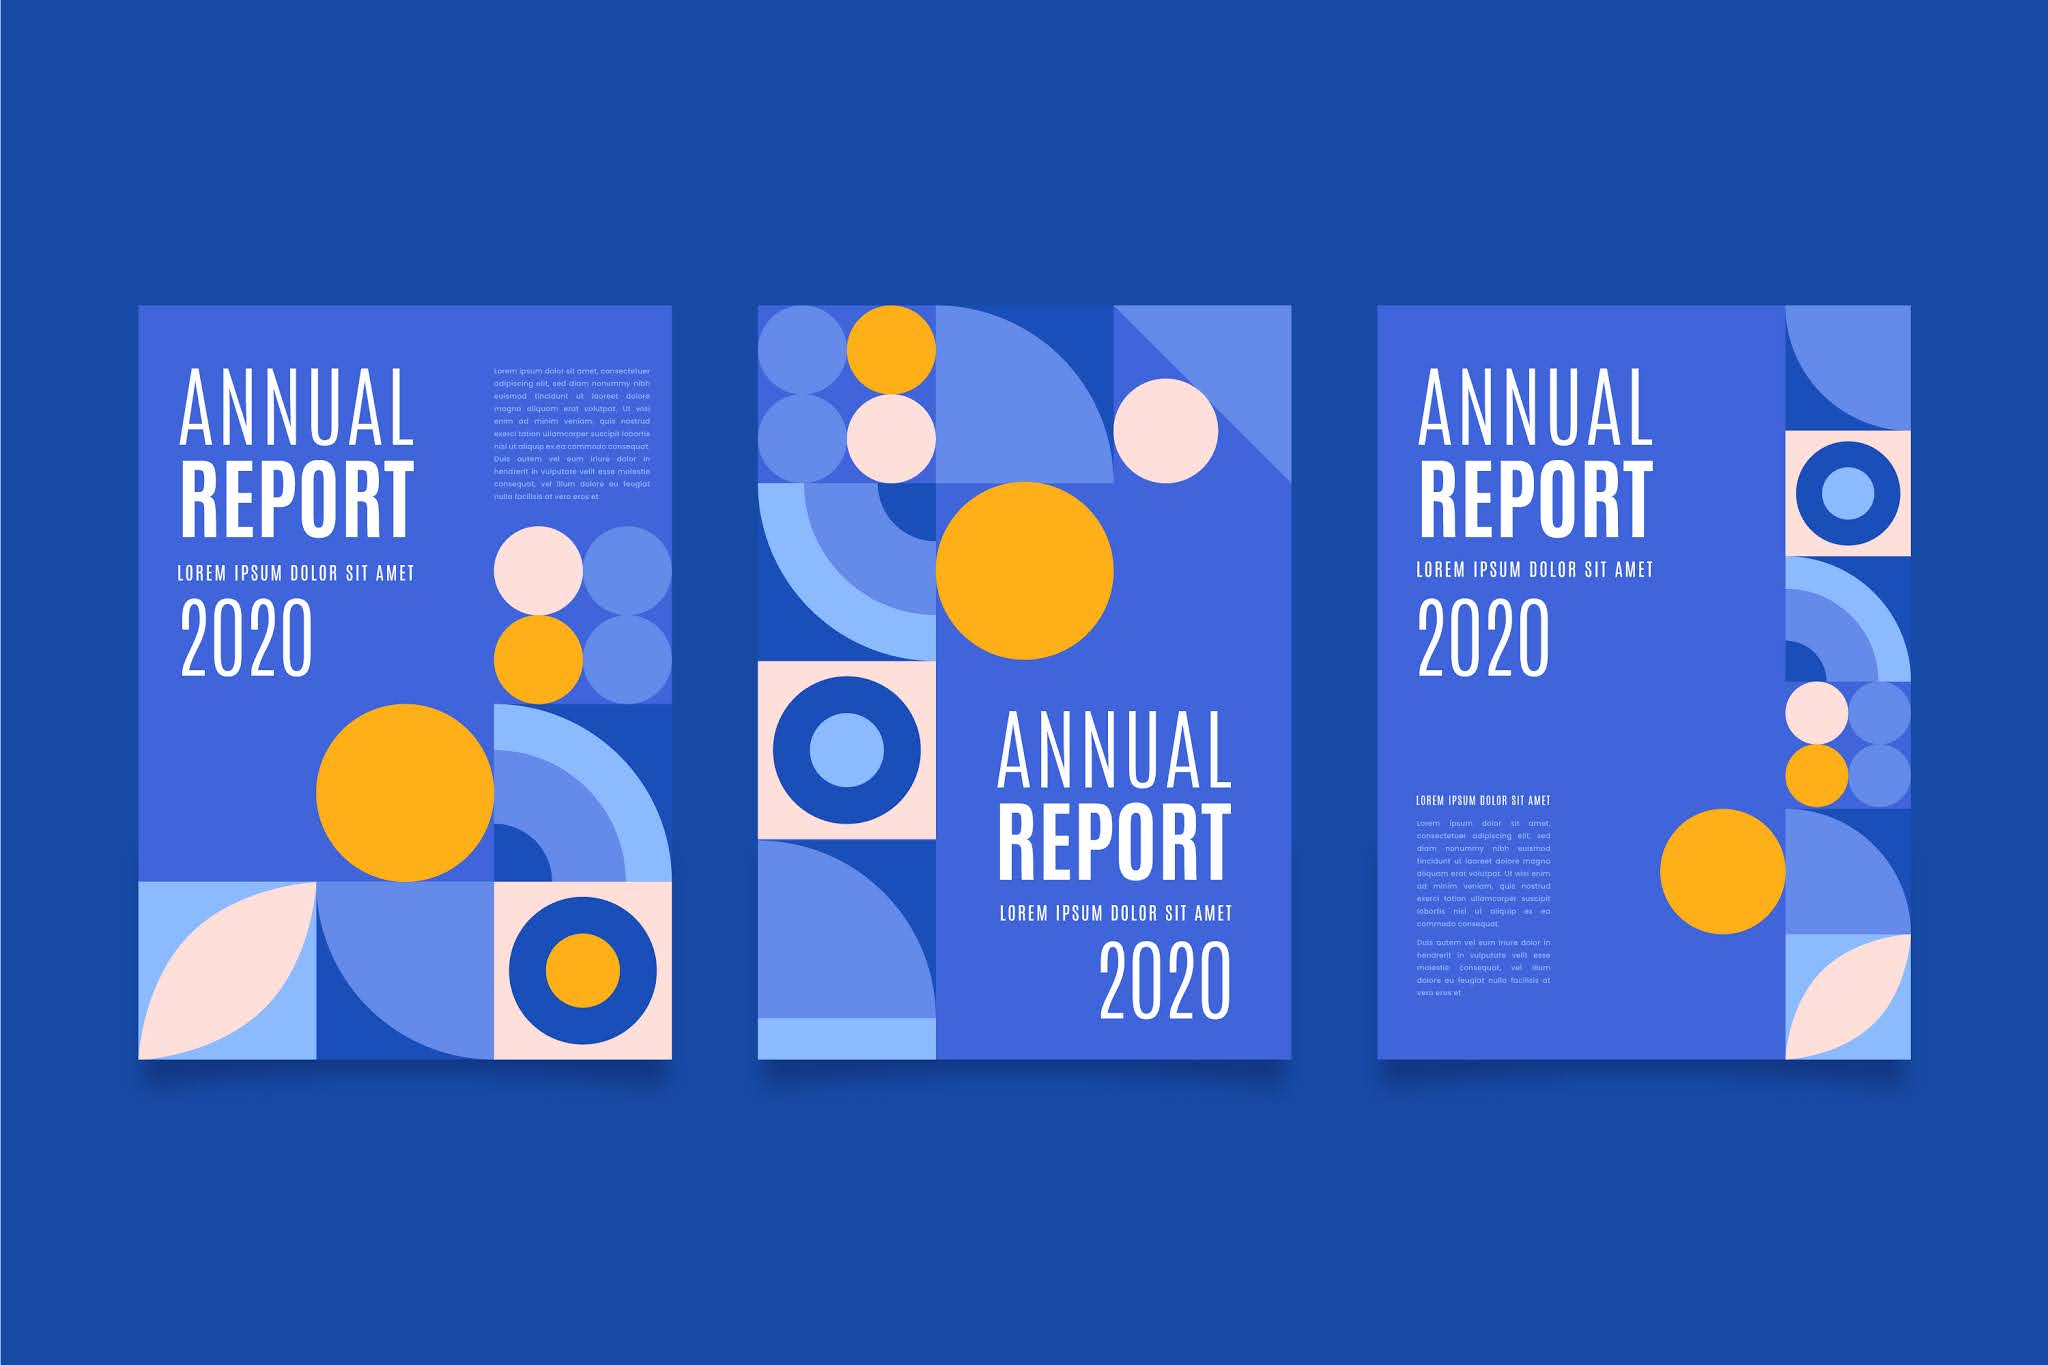 How to read annual report